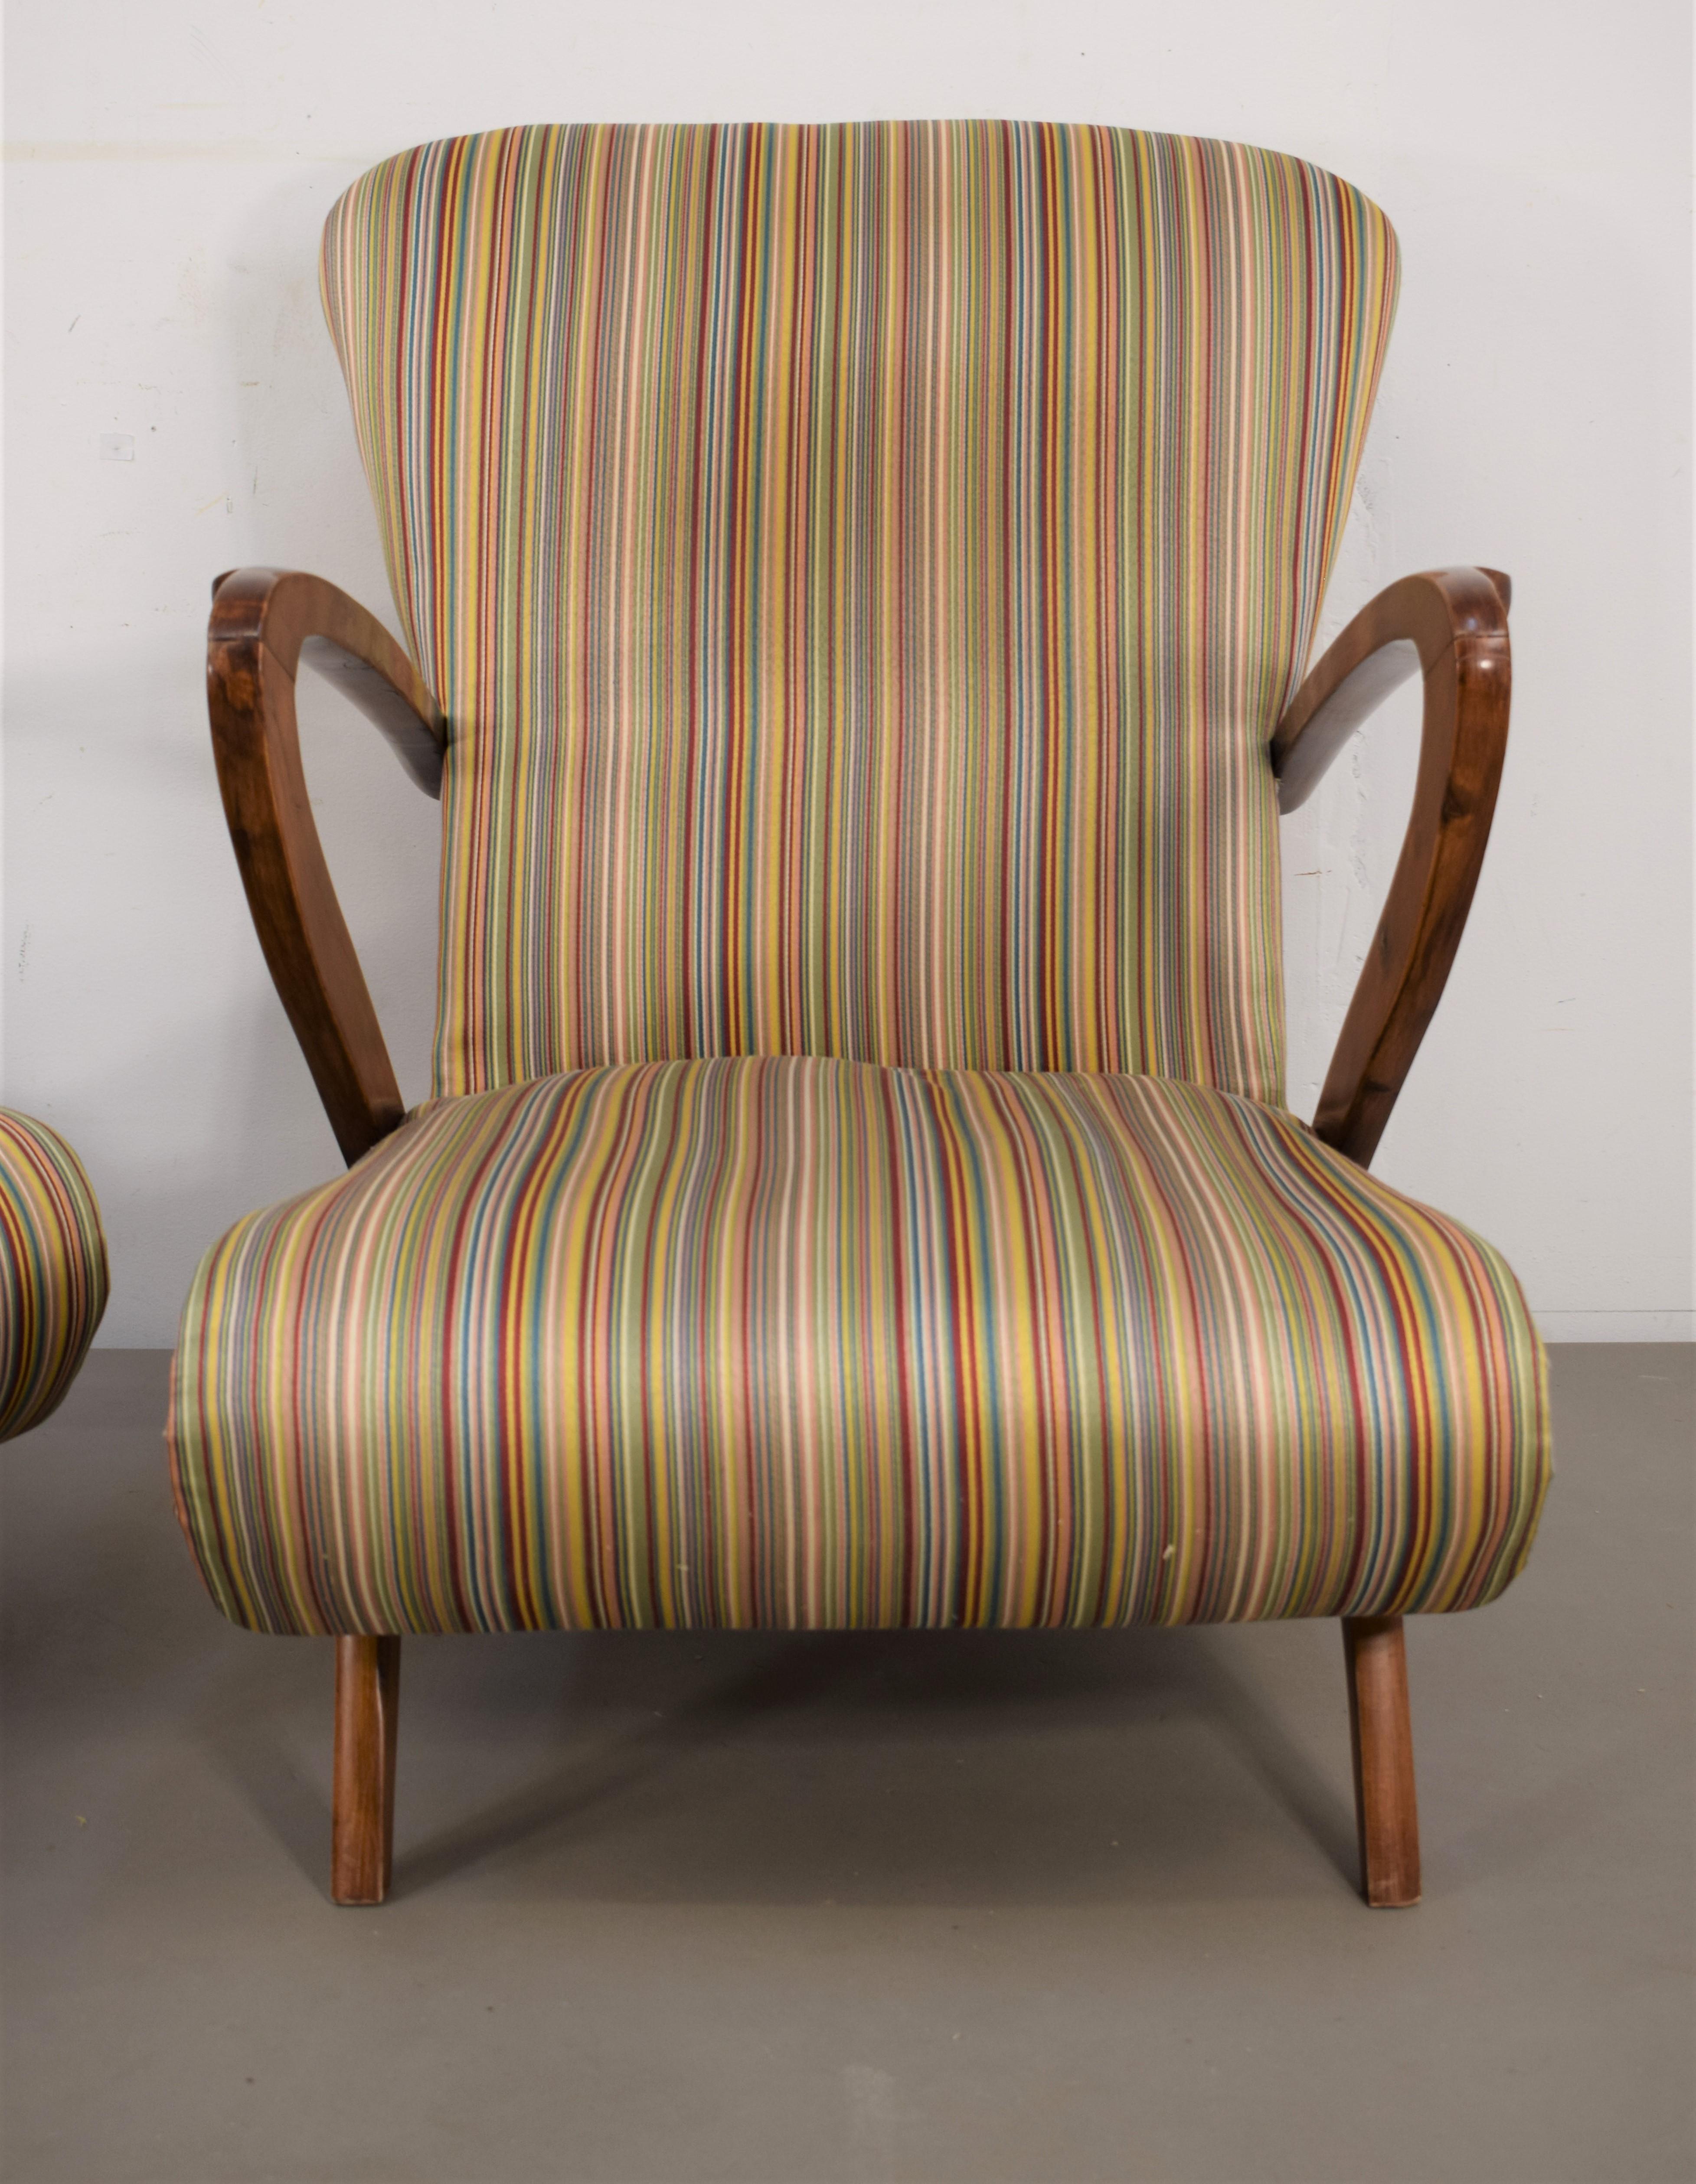 Pair of armchairs, Guglielmo Ulrich style, 1950s.
Dimensions: H=82 cm; W=66 cm; D=88 cm; Height seat= 31 cm.